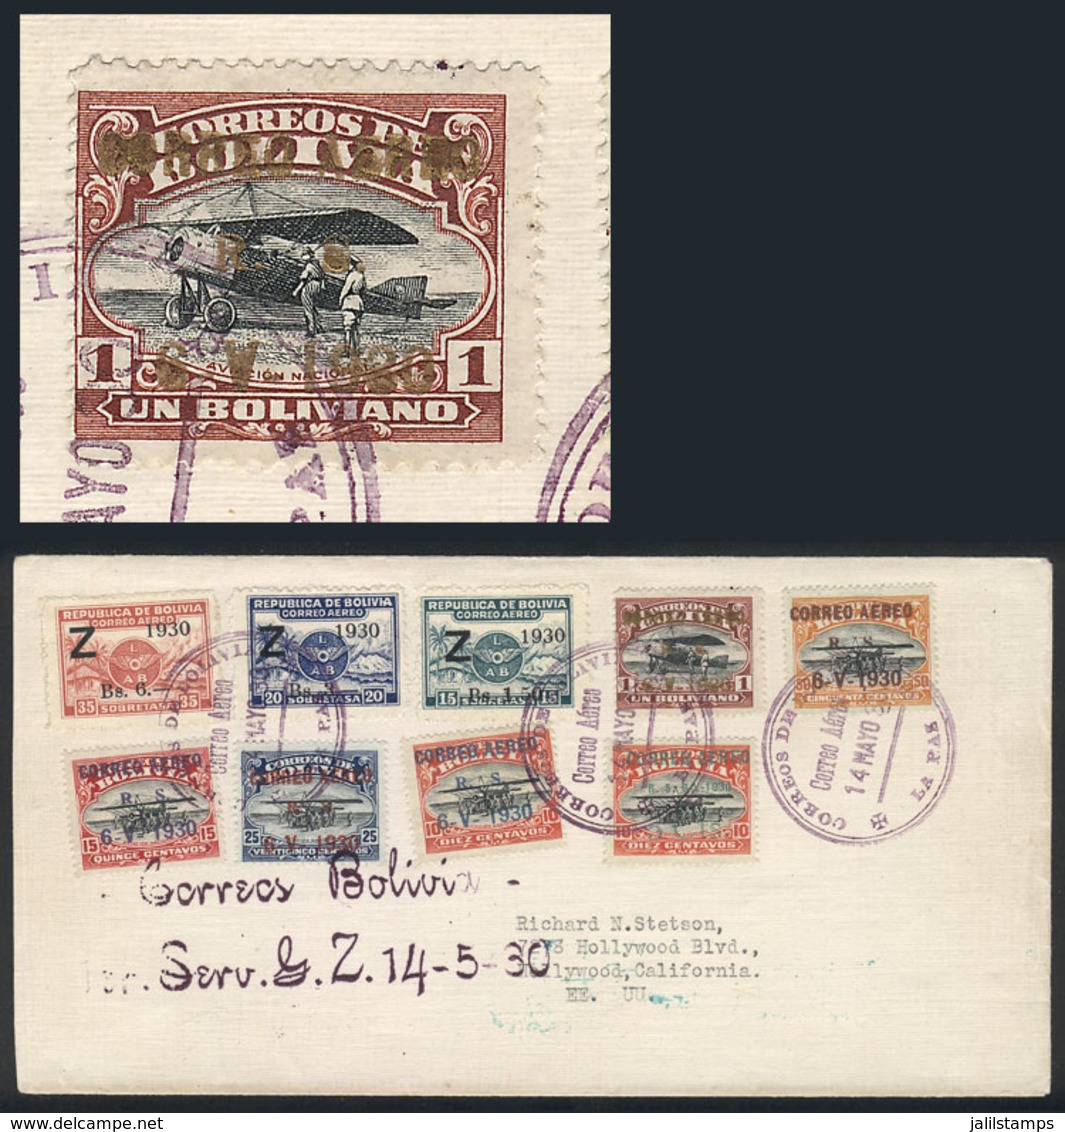 BOLIVIA: Cover With The 2 Zeppelin Sets Of 1930, The 1B. Value With Overprint In METAL INK (bronze), Cancelled With Date - Bolivia